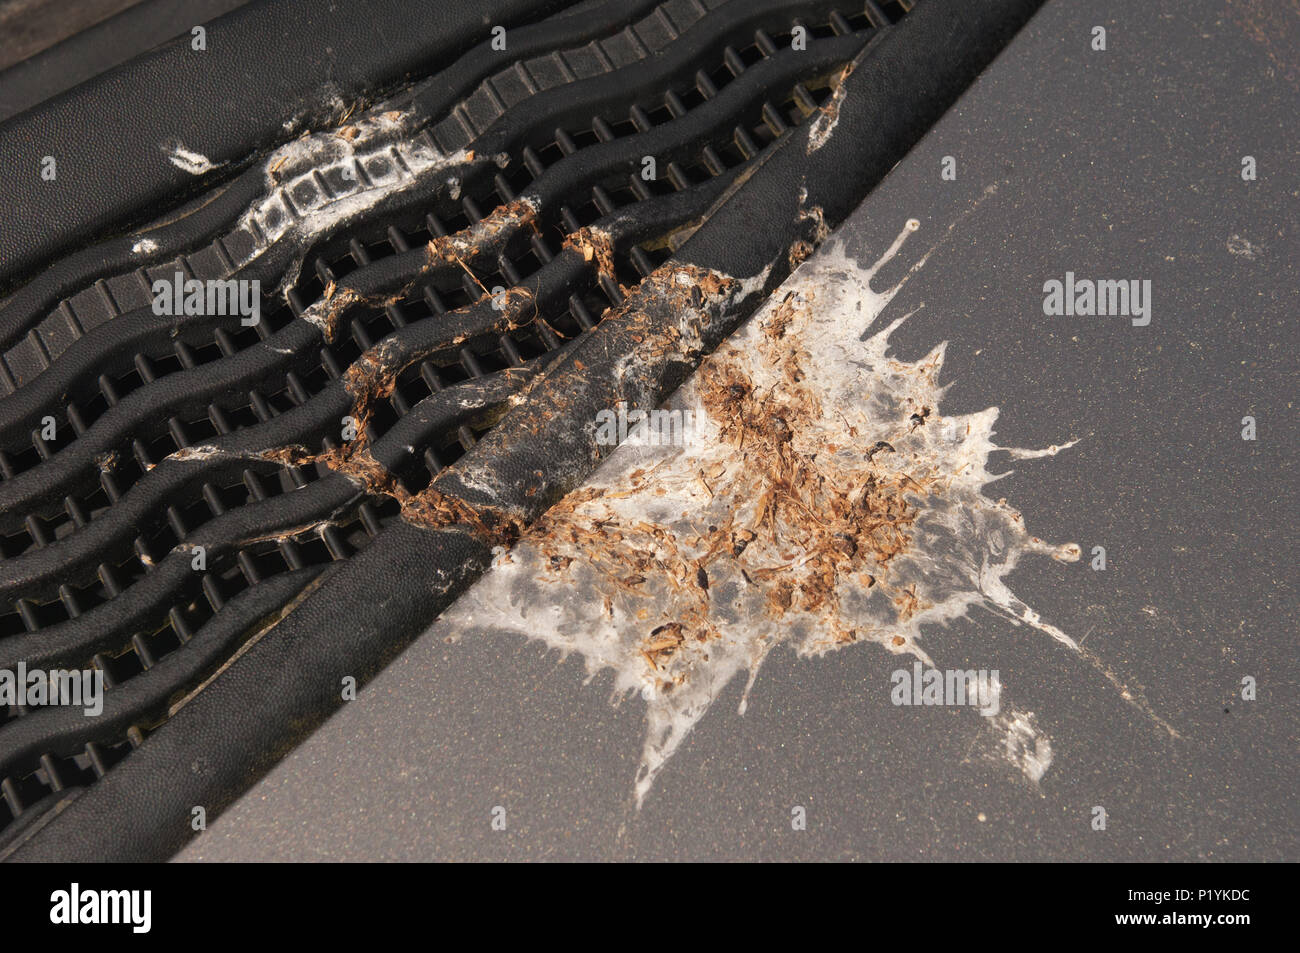 Close up of bird droppings on car. Stock Photo